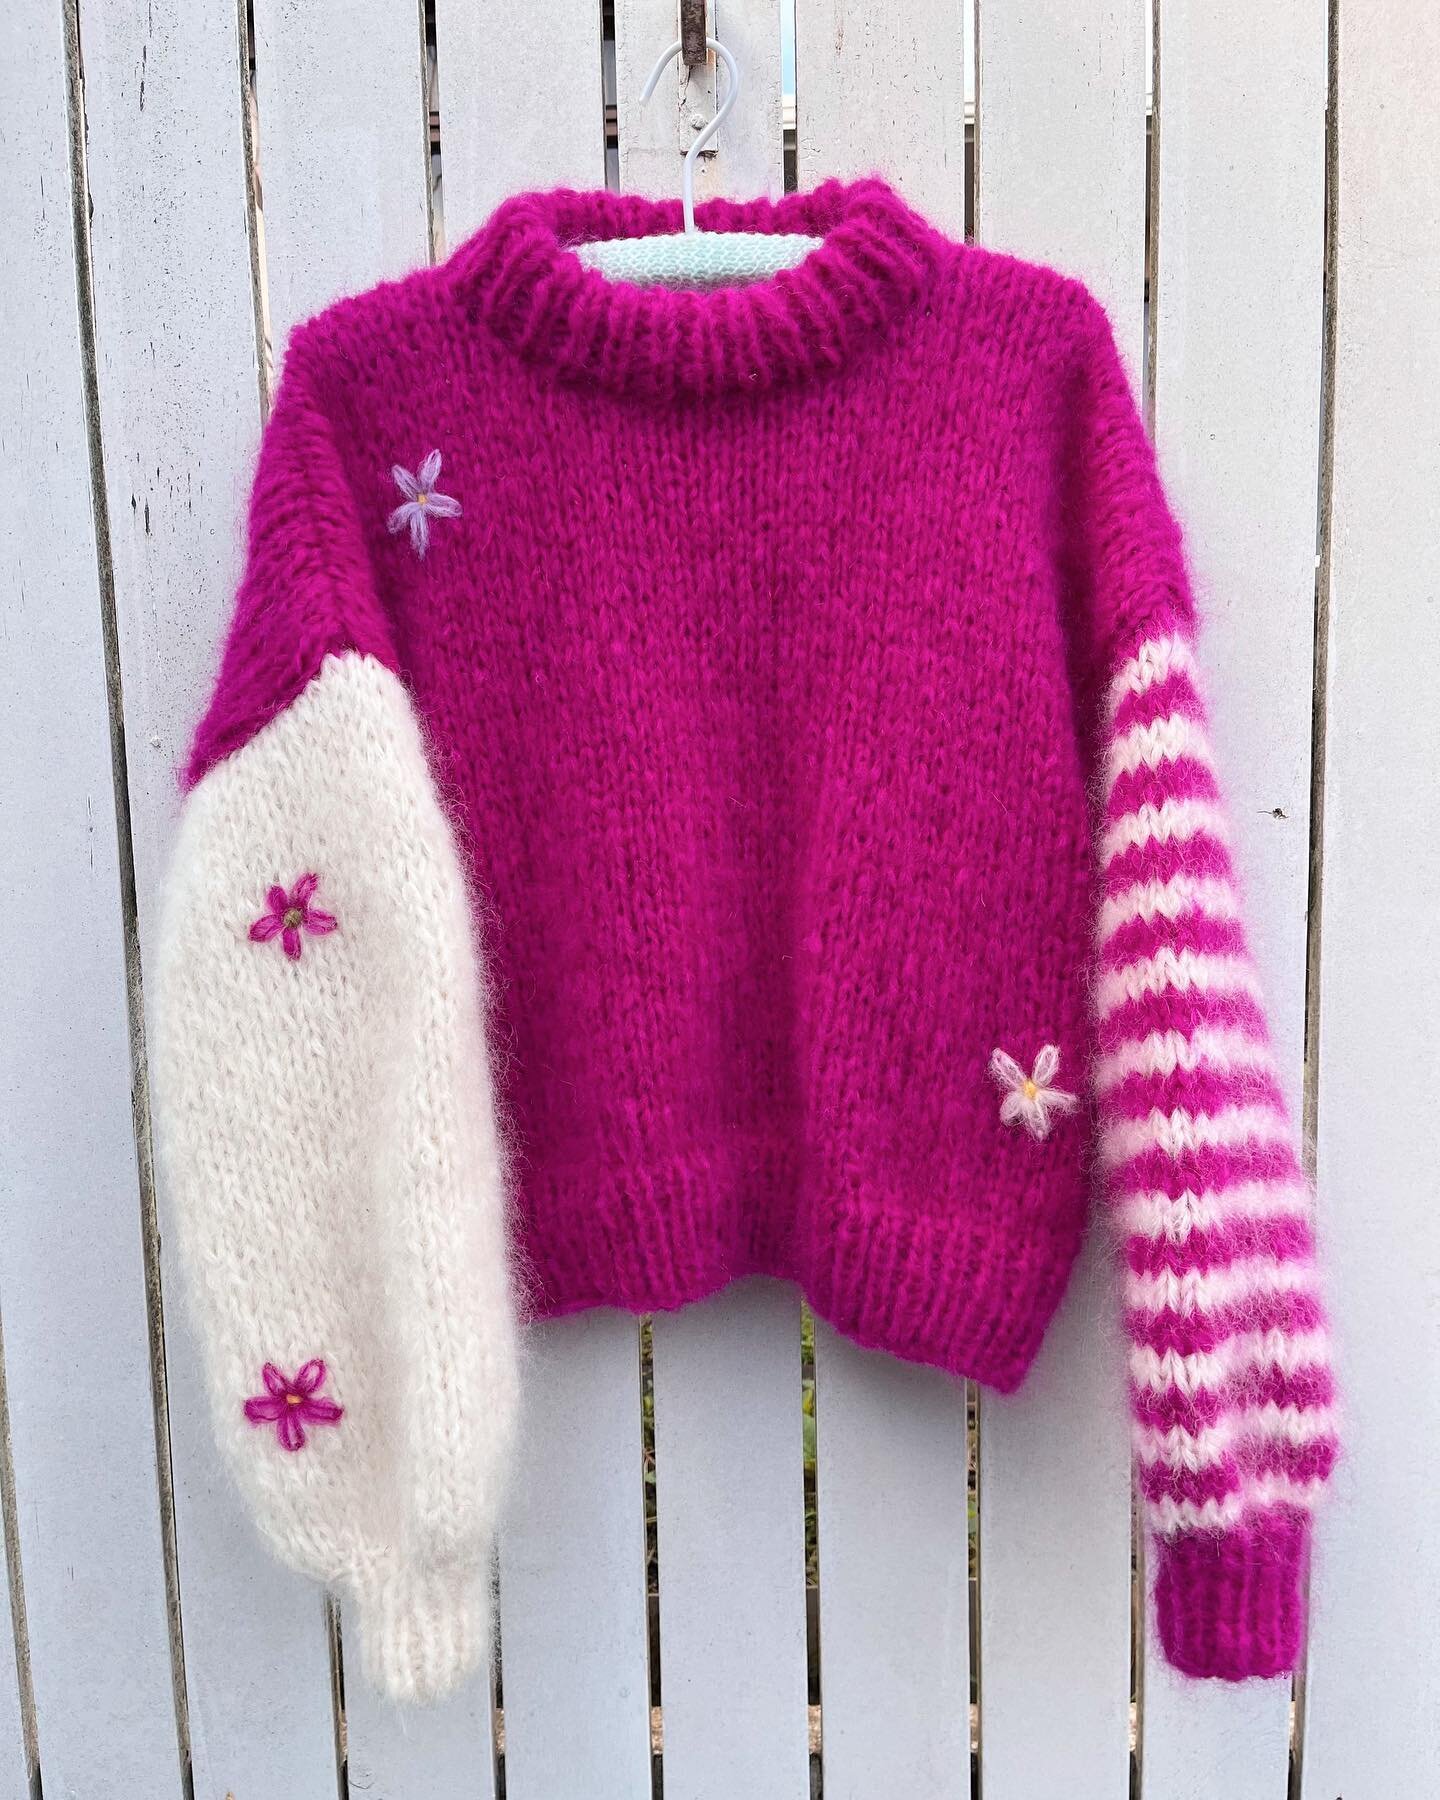 Fuchsia!
&bull;
Doubled-over crew neck.
White feature sleeve.
Mini stripe feature sleeve.
A scattering of daisies.

#dorothynz #customknit #nzmade